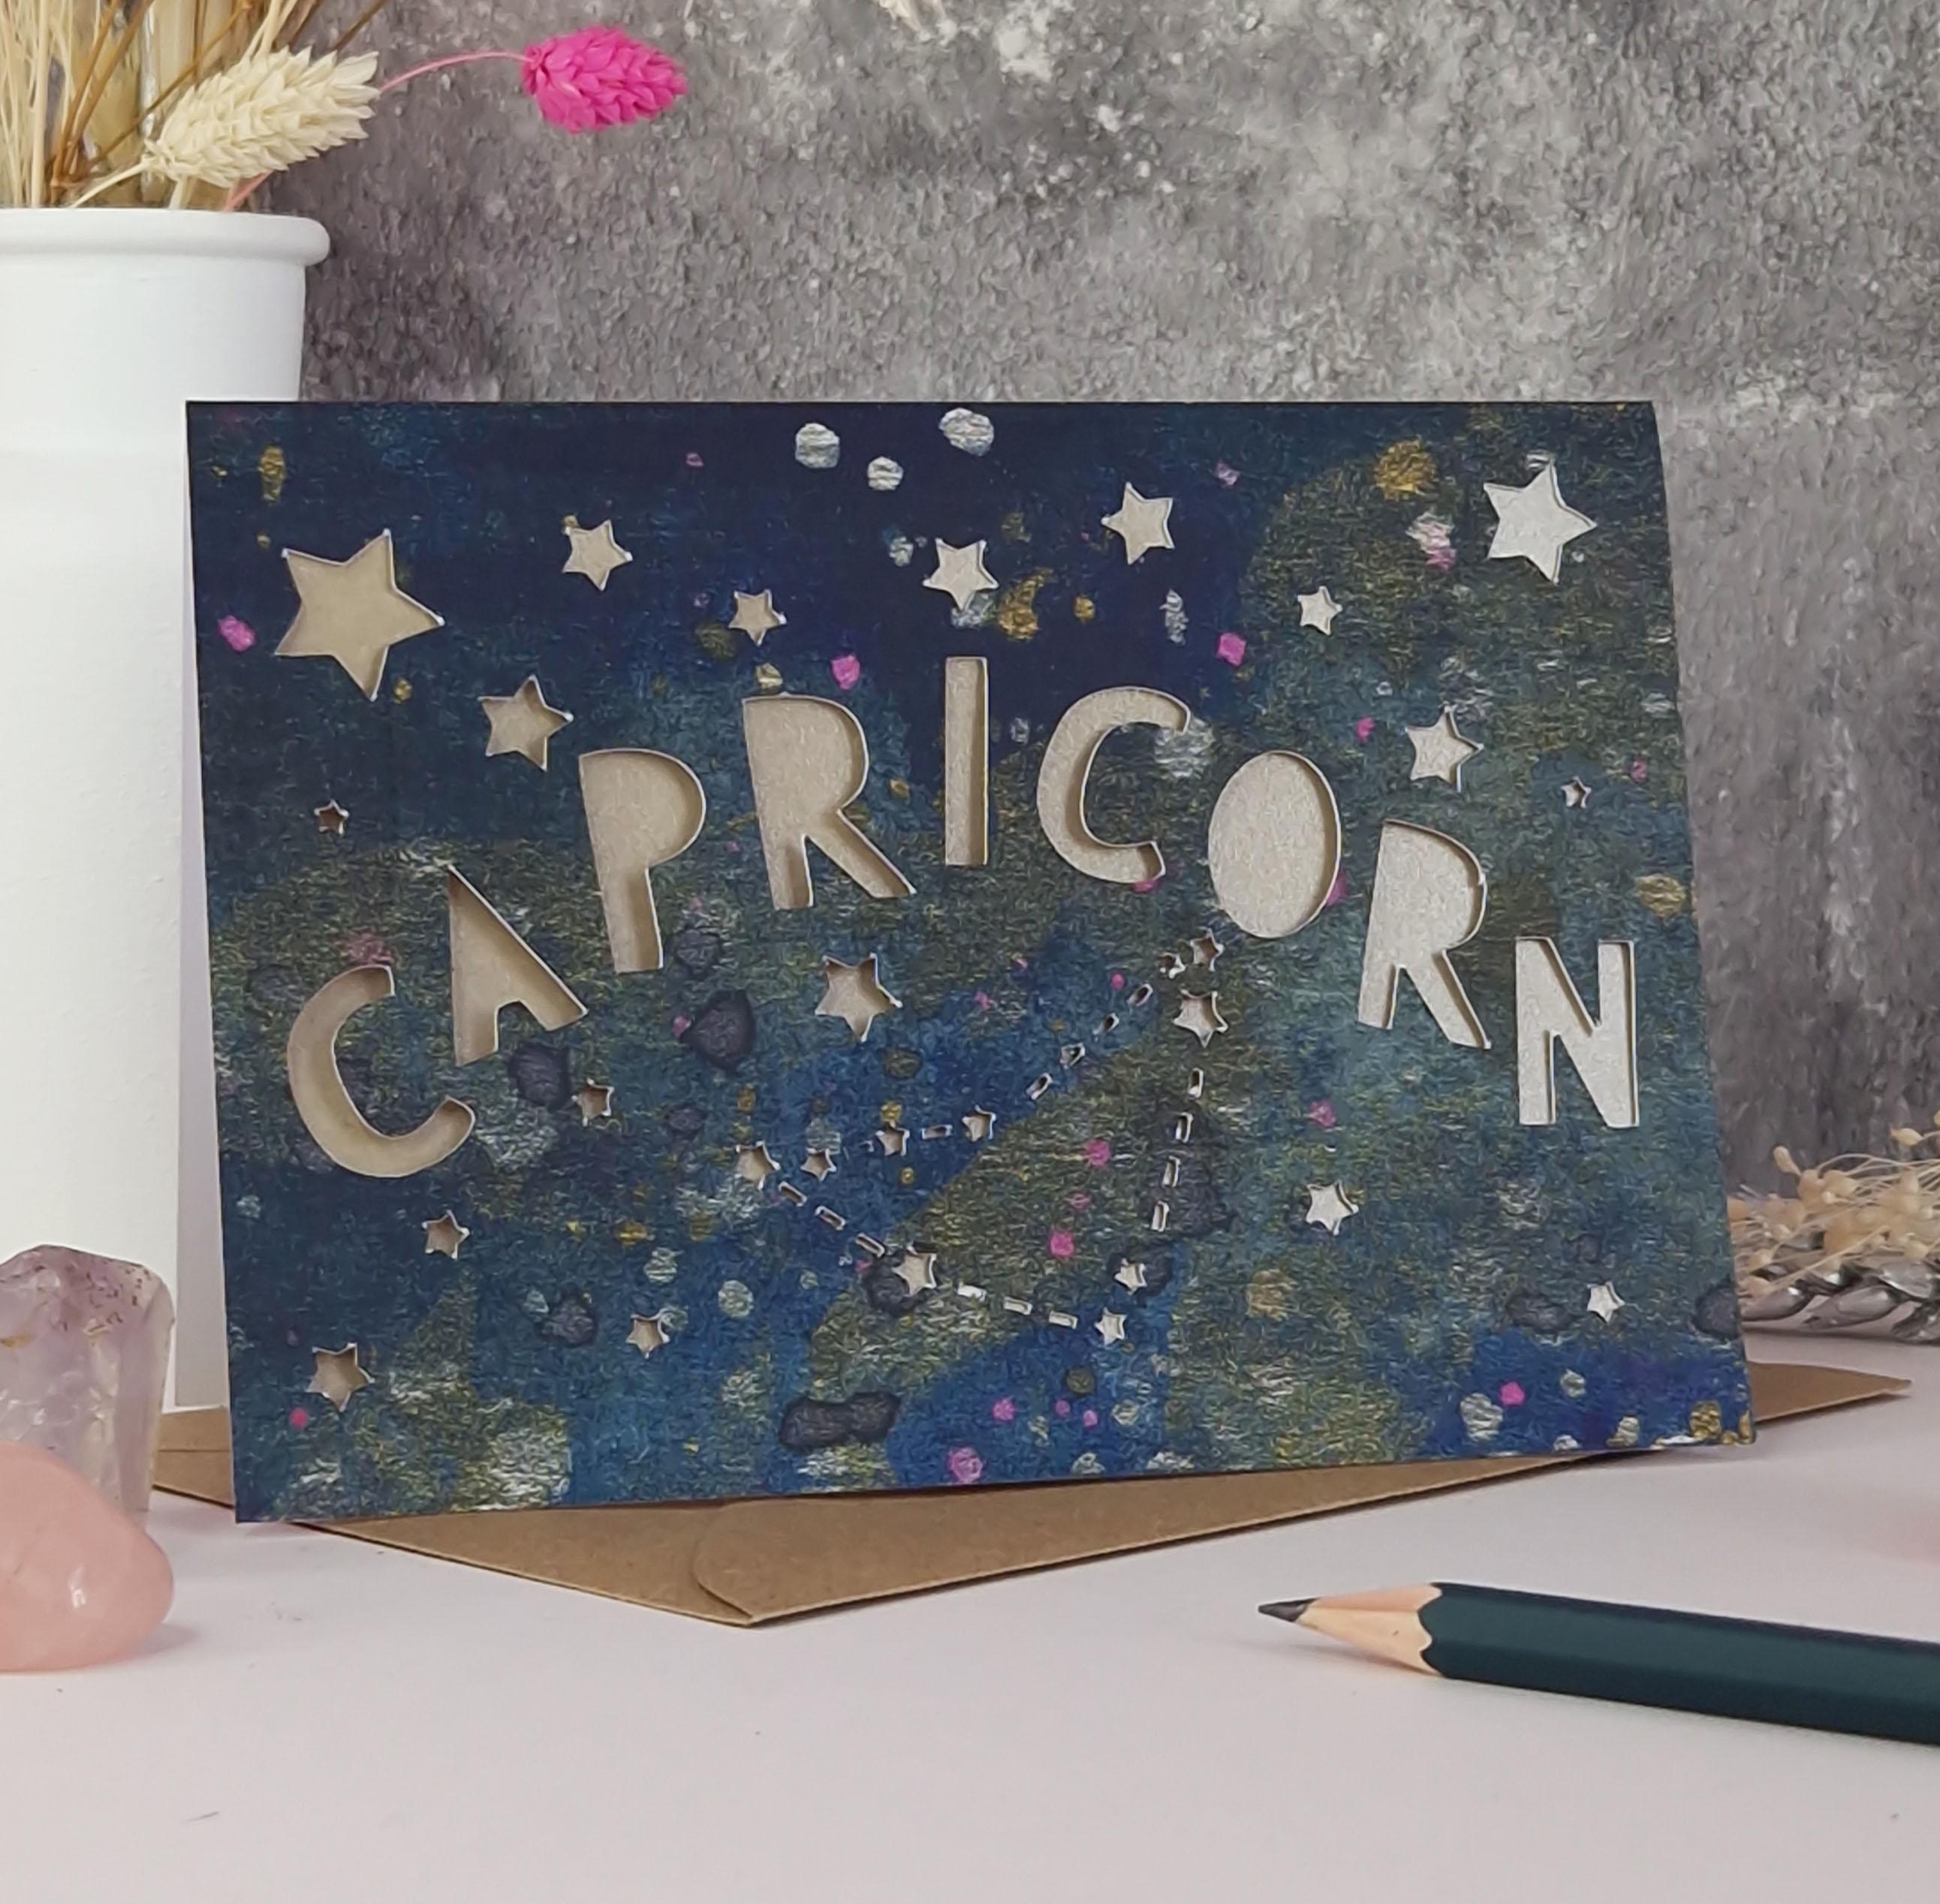 Midnight Blue printed card with papercut text that says 'Capricorn' and a mink pearl liner